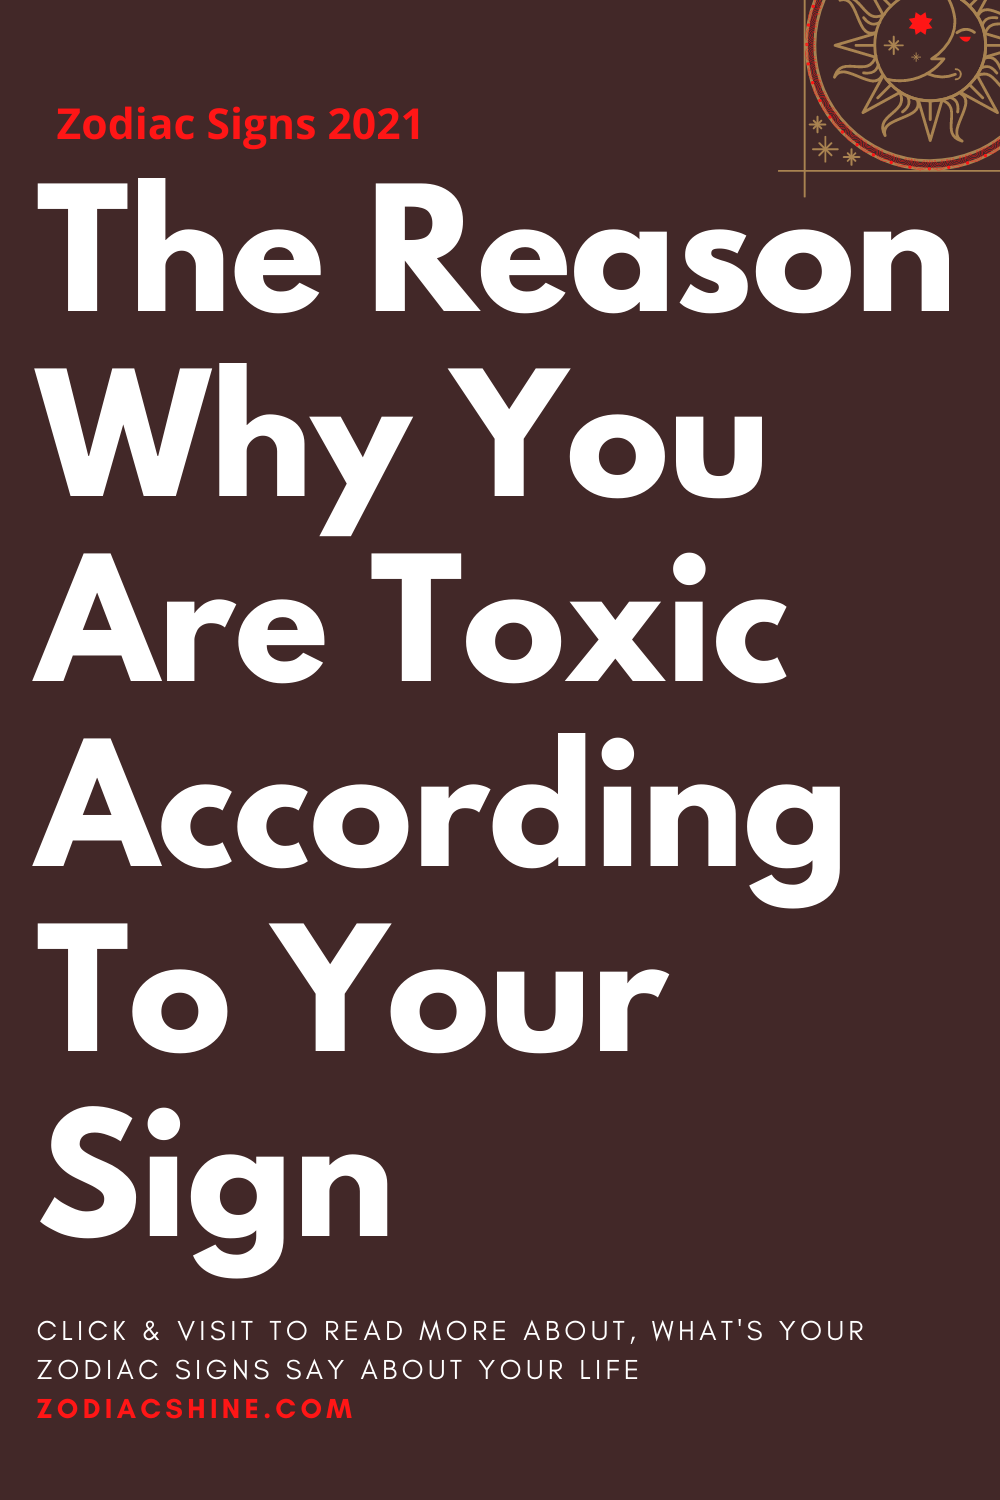 The Reason Why You Are Toxic According To Your Sign